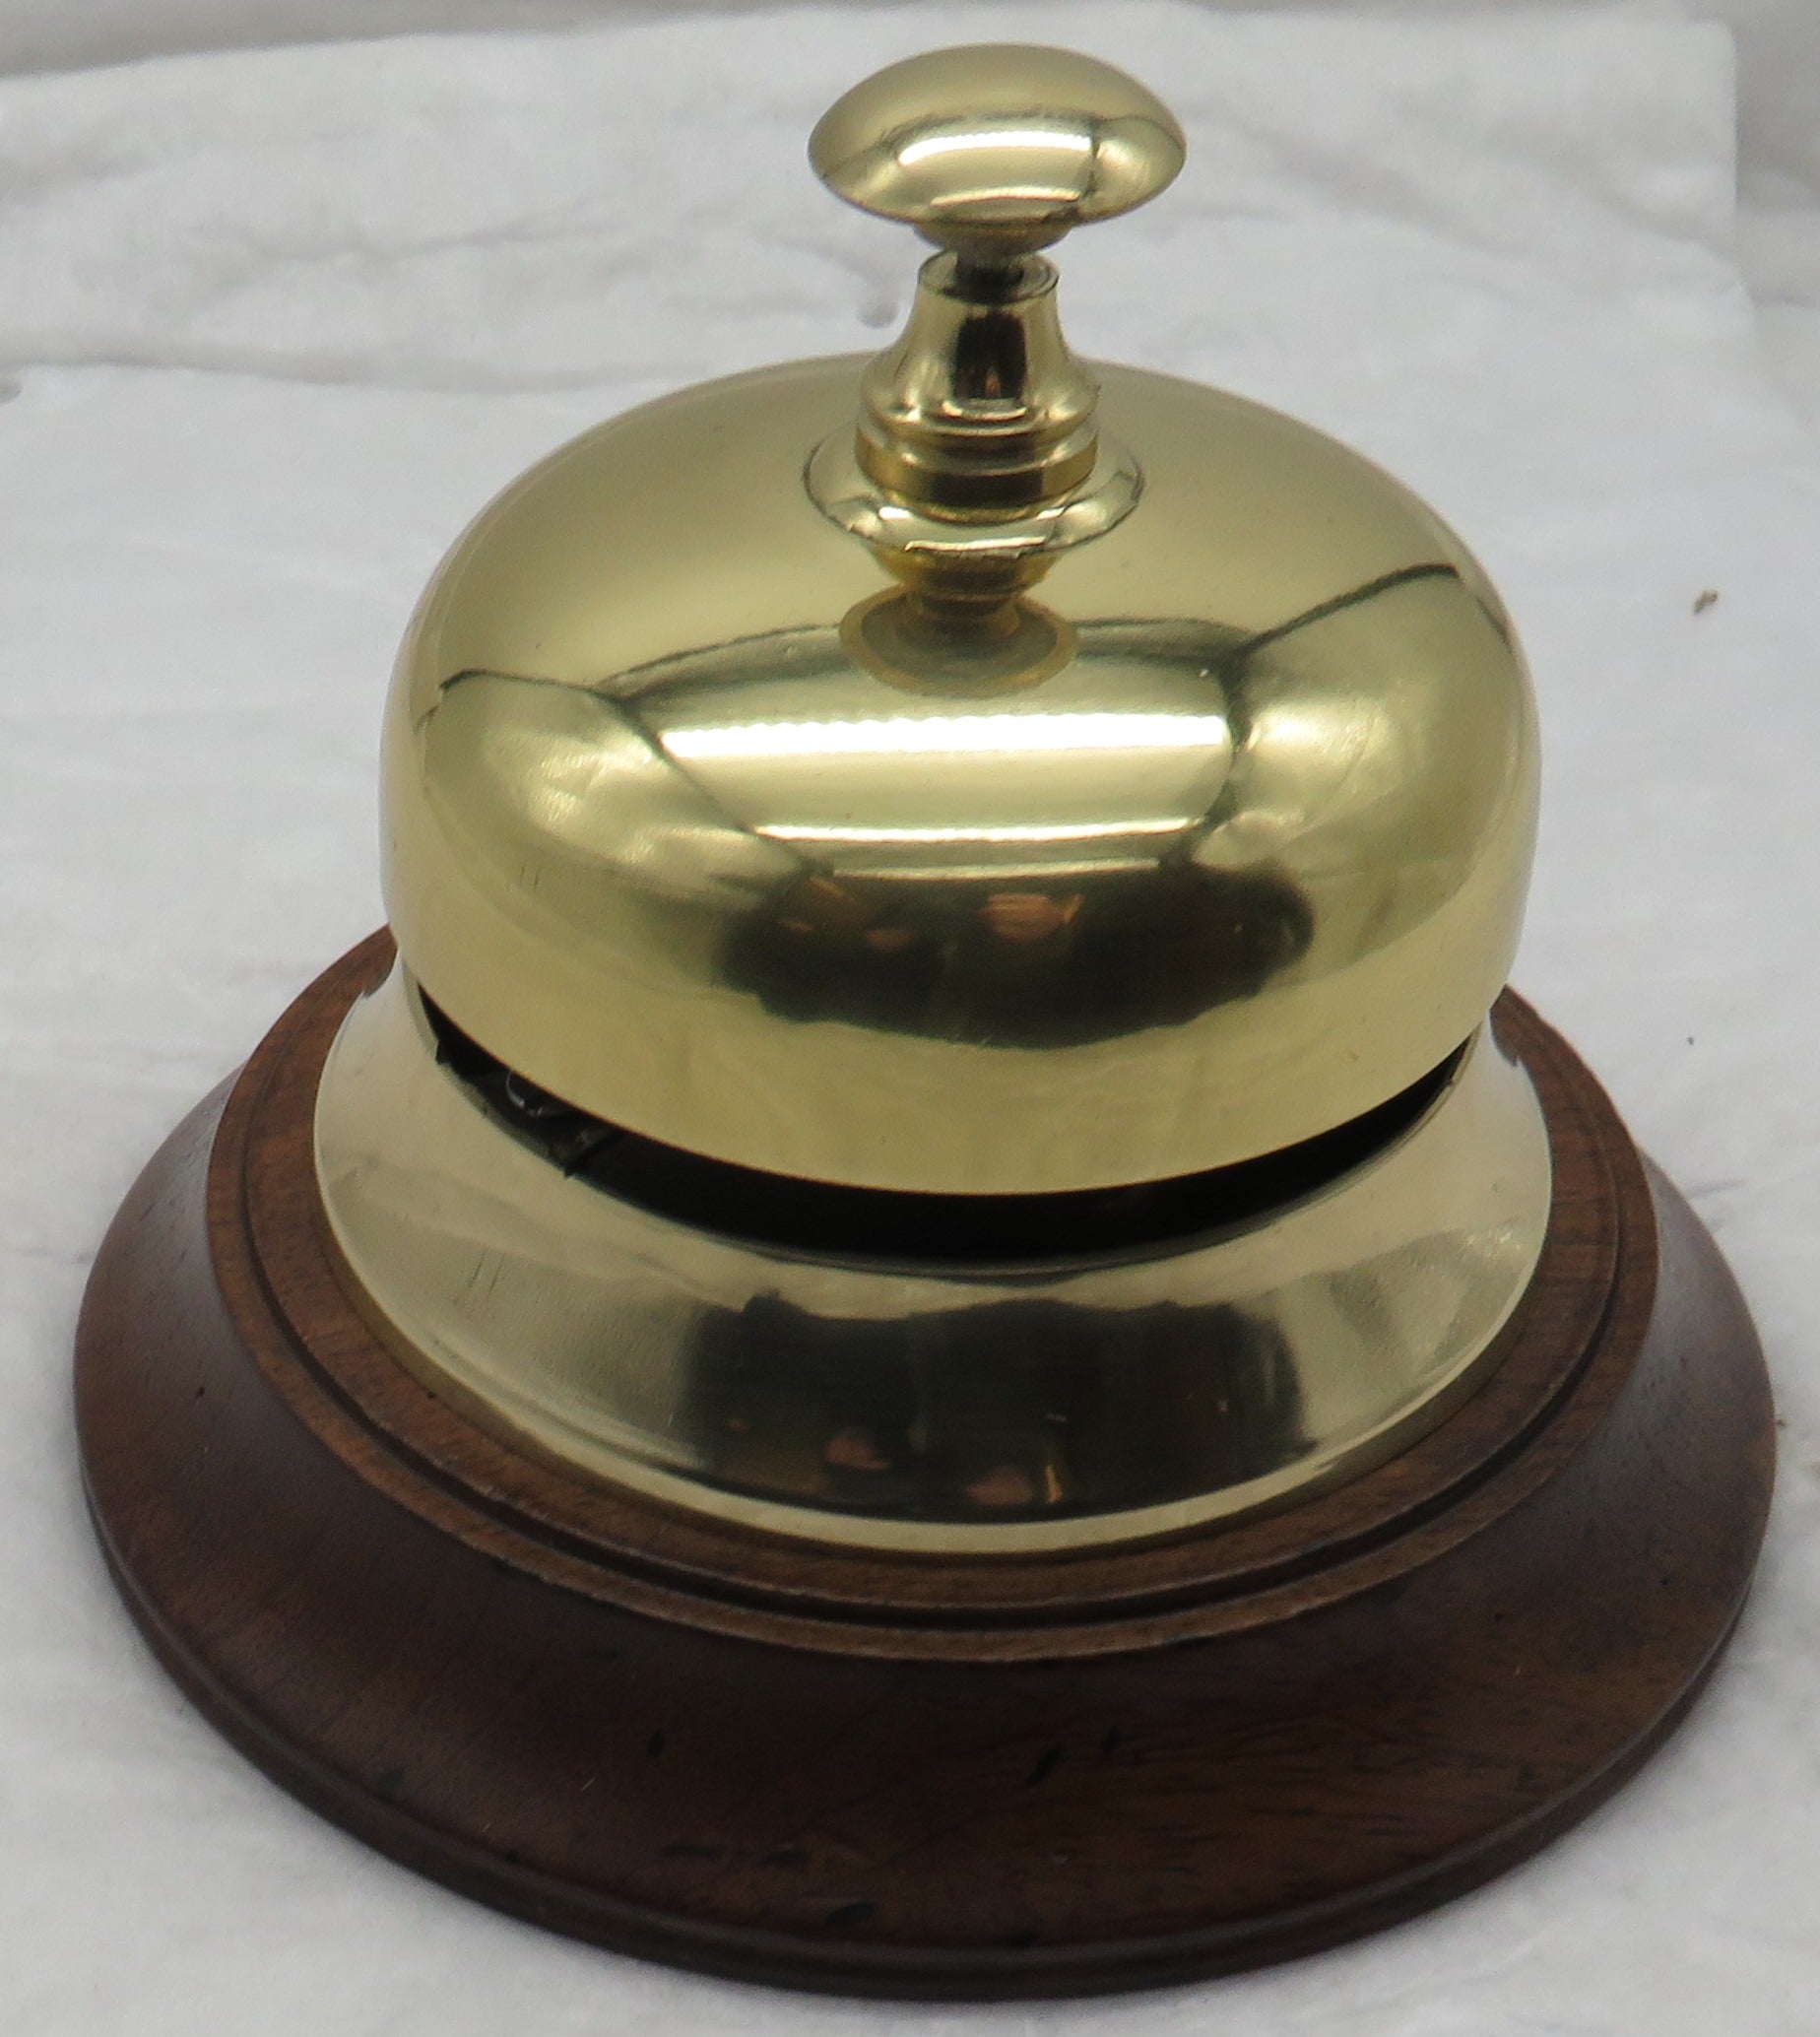 Authentic Models Sailors Inn Desk Bell AC100 Brass Highly Polished OBSOLETE Discontinued NLA 